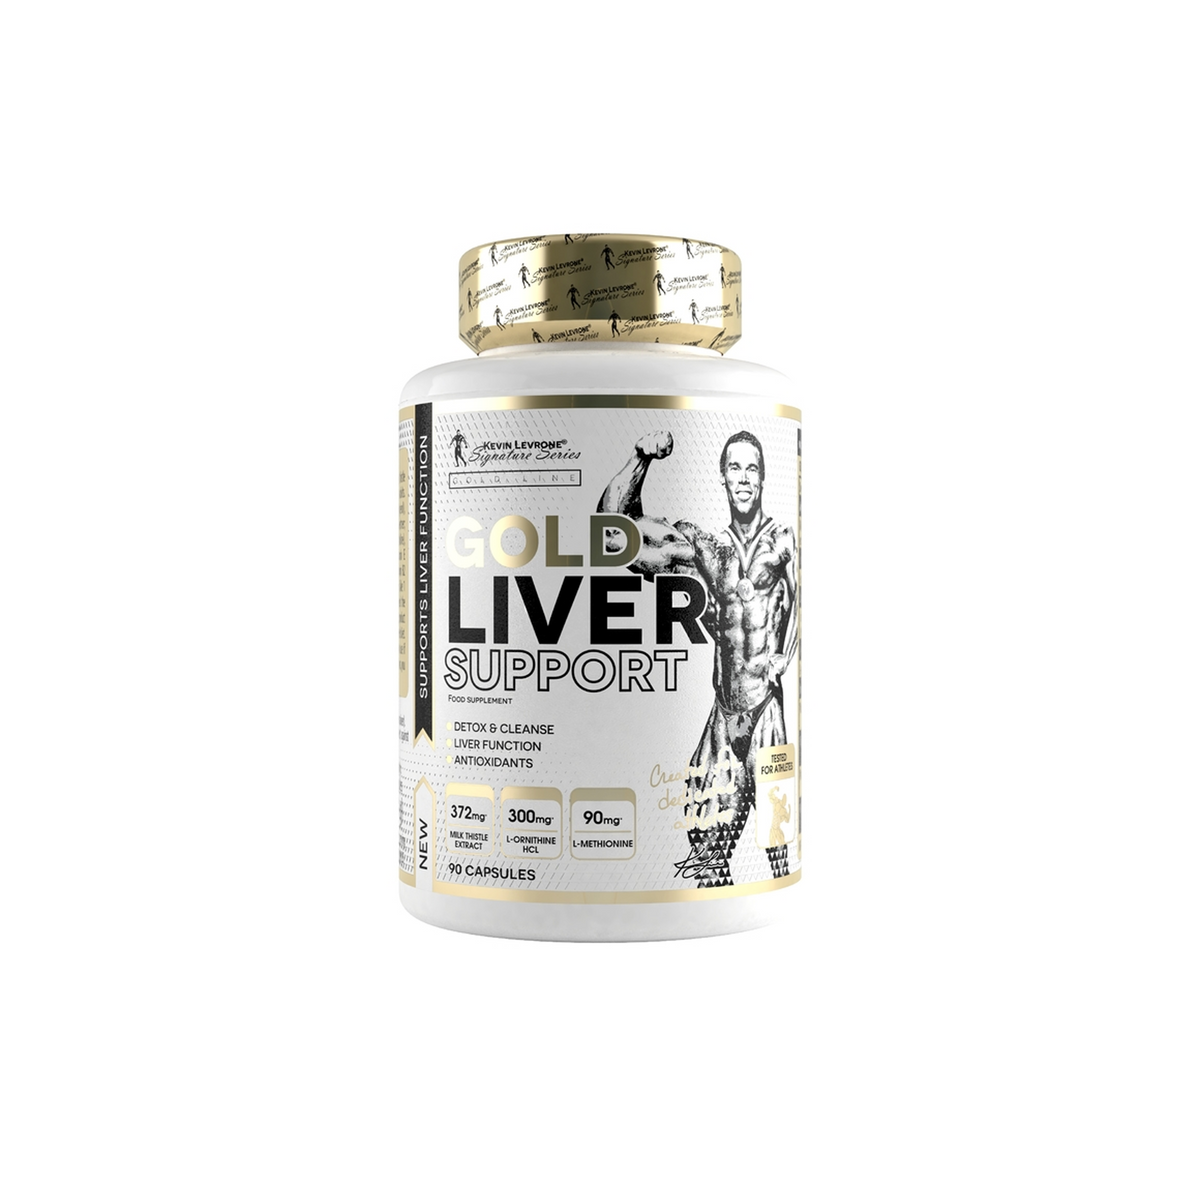 GOLD LIVER SUPPORT 90 CAPSULES